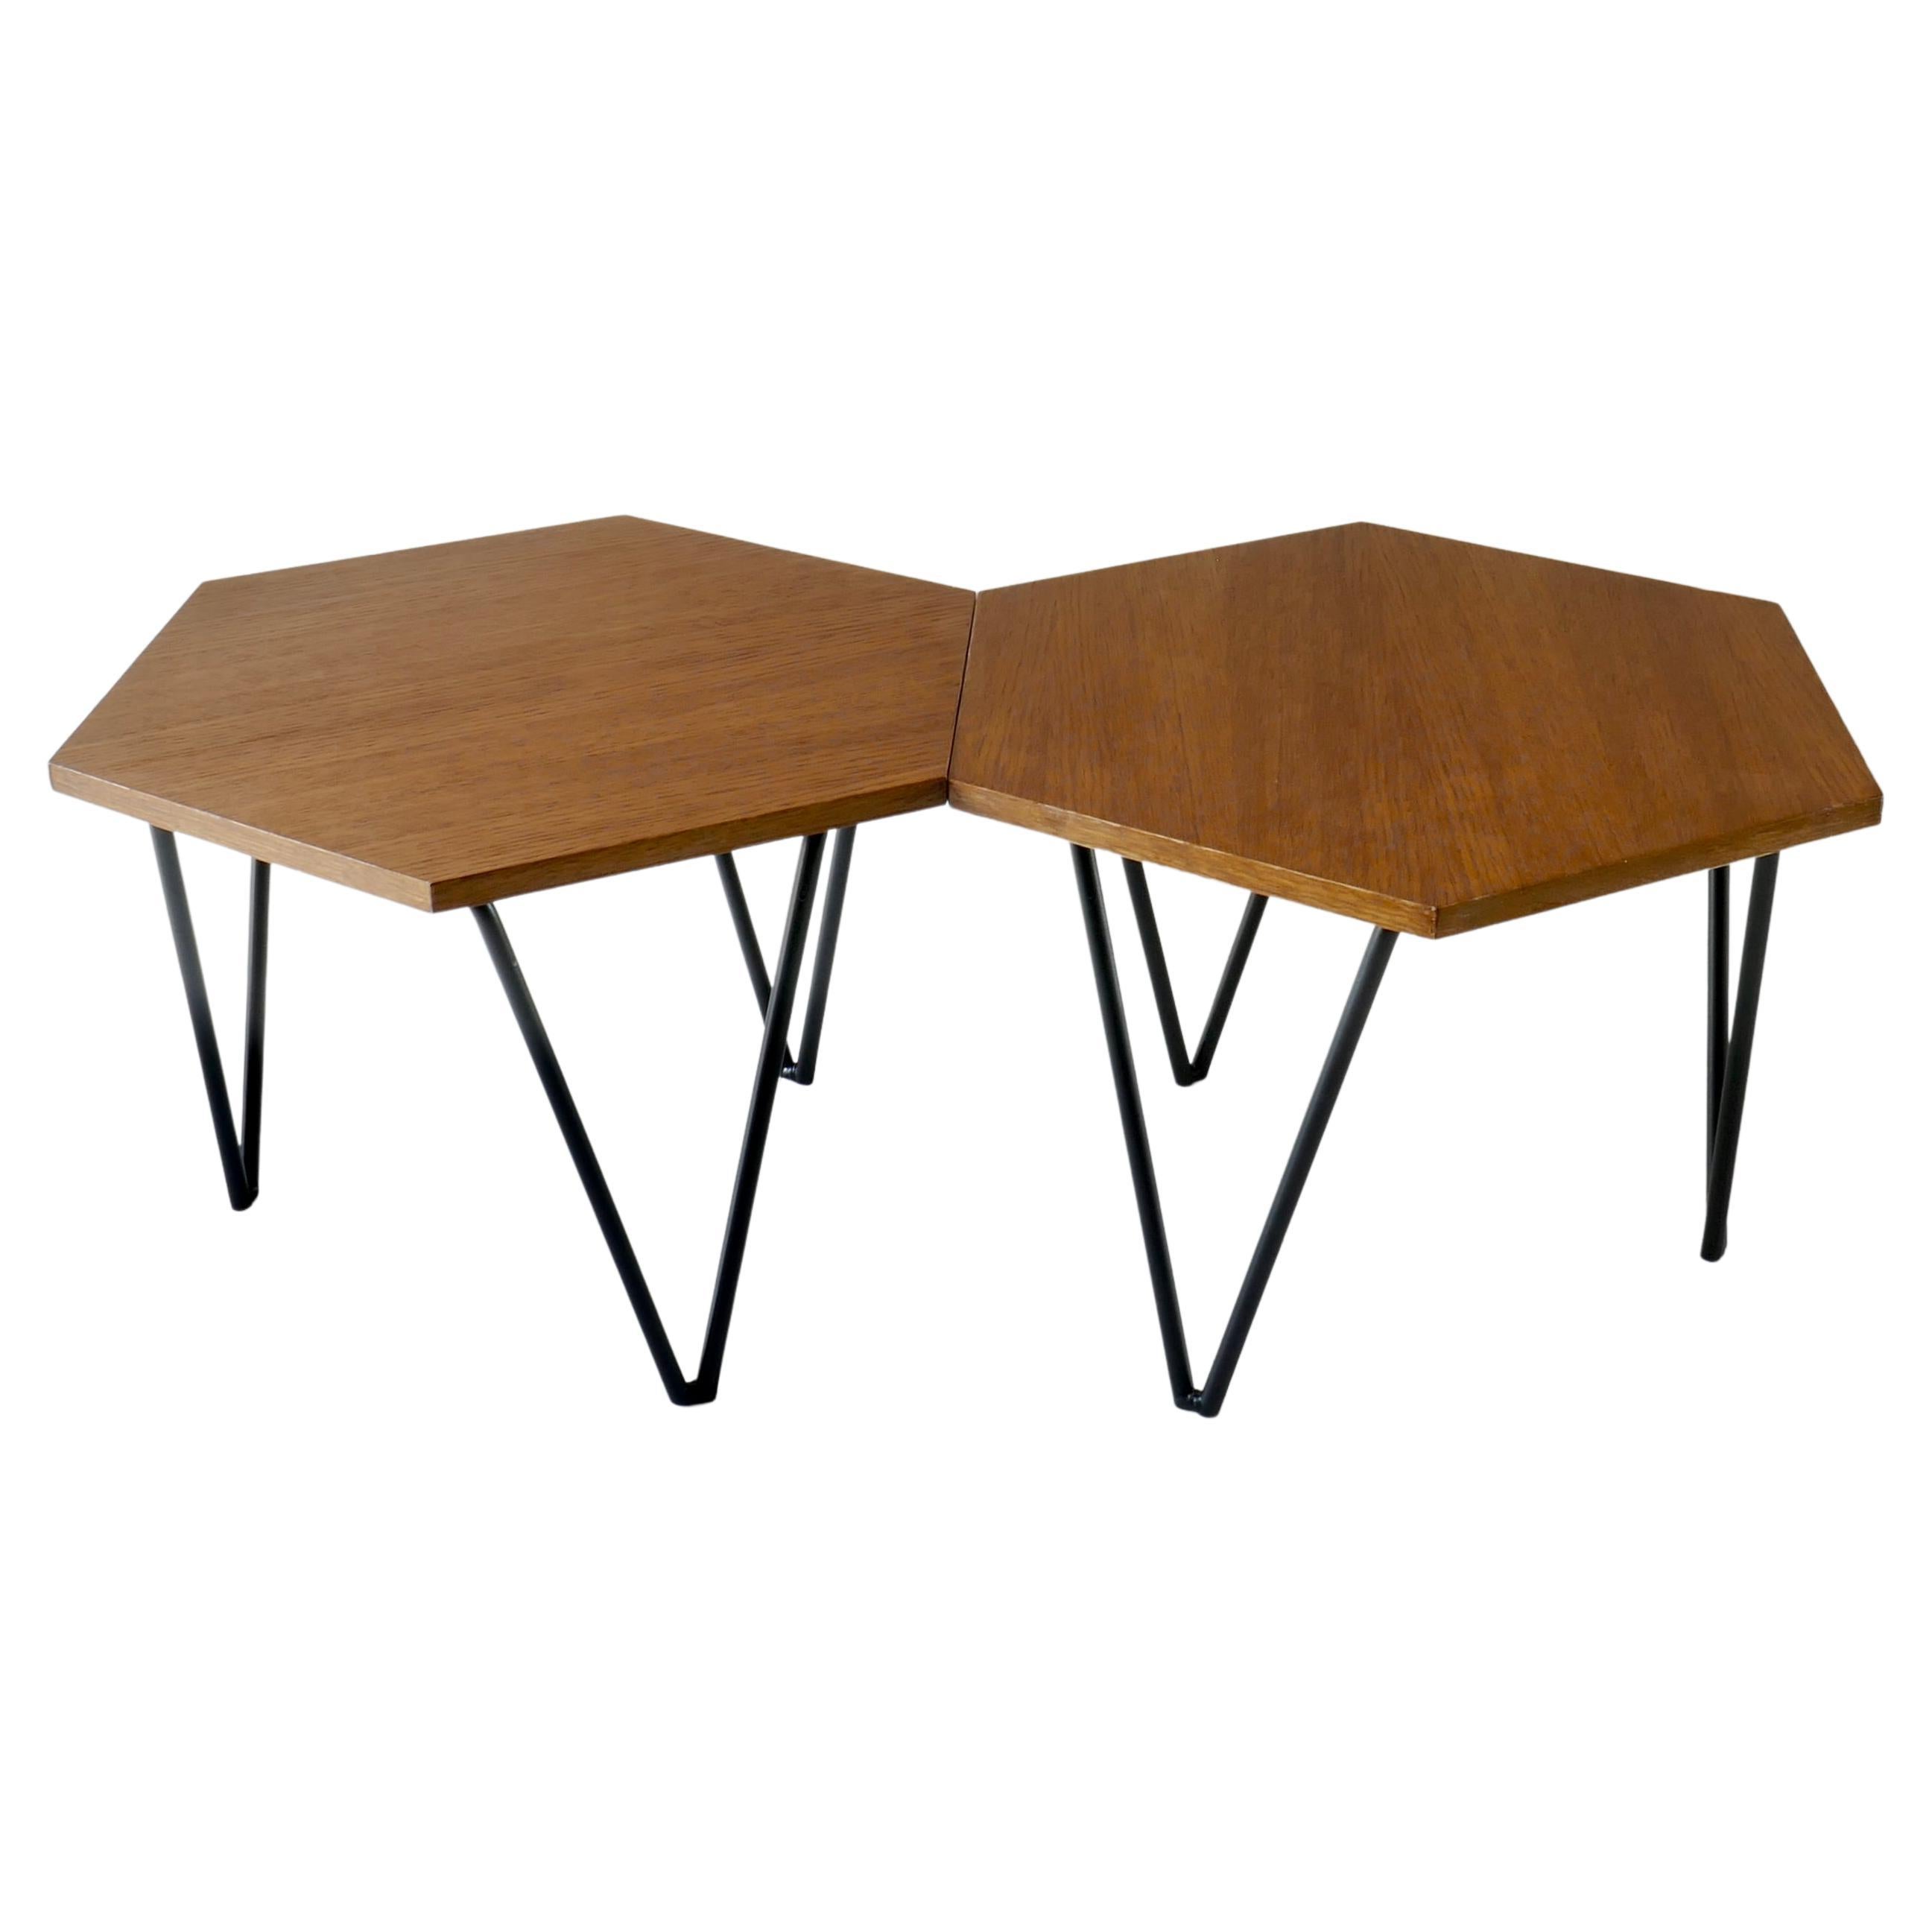 Set of 2 Hexagonal Gio Ponti Low Tables by Isa Bergamo, Italy, 1950s For Sale